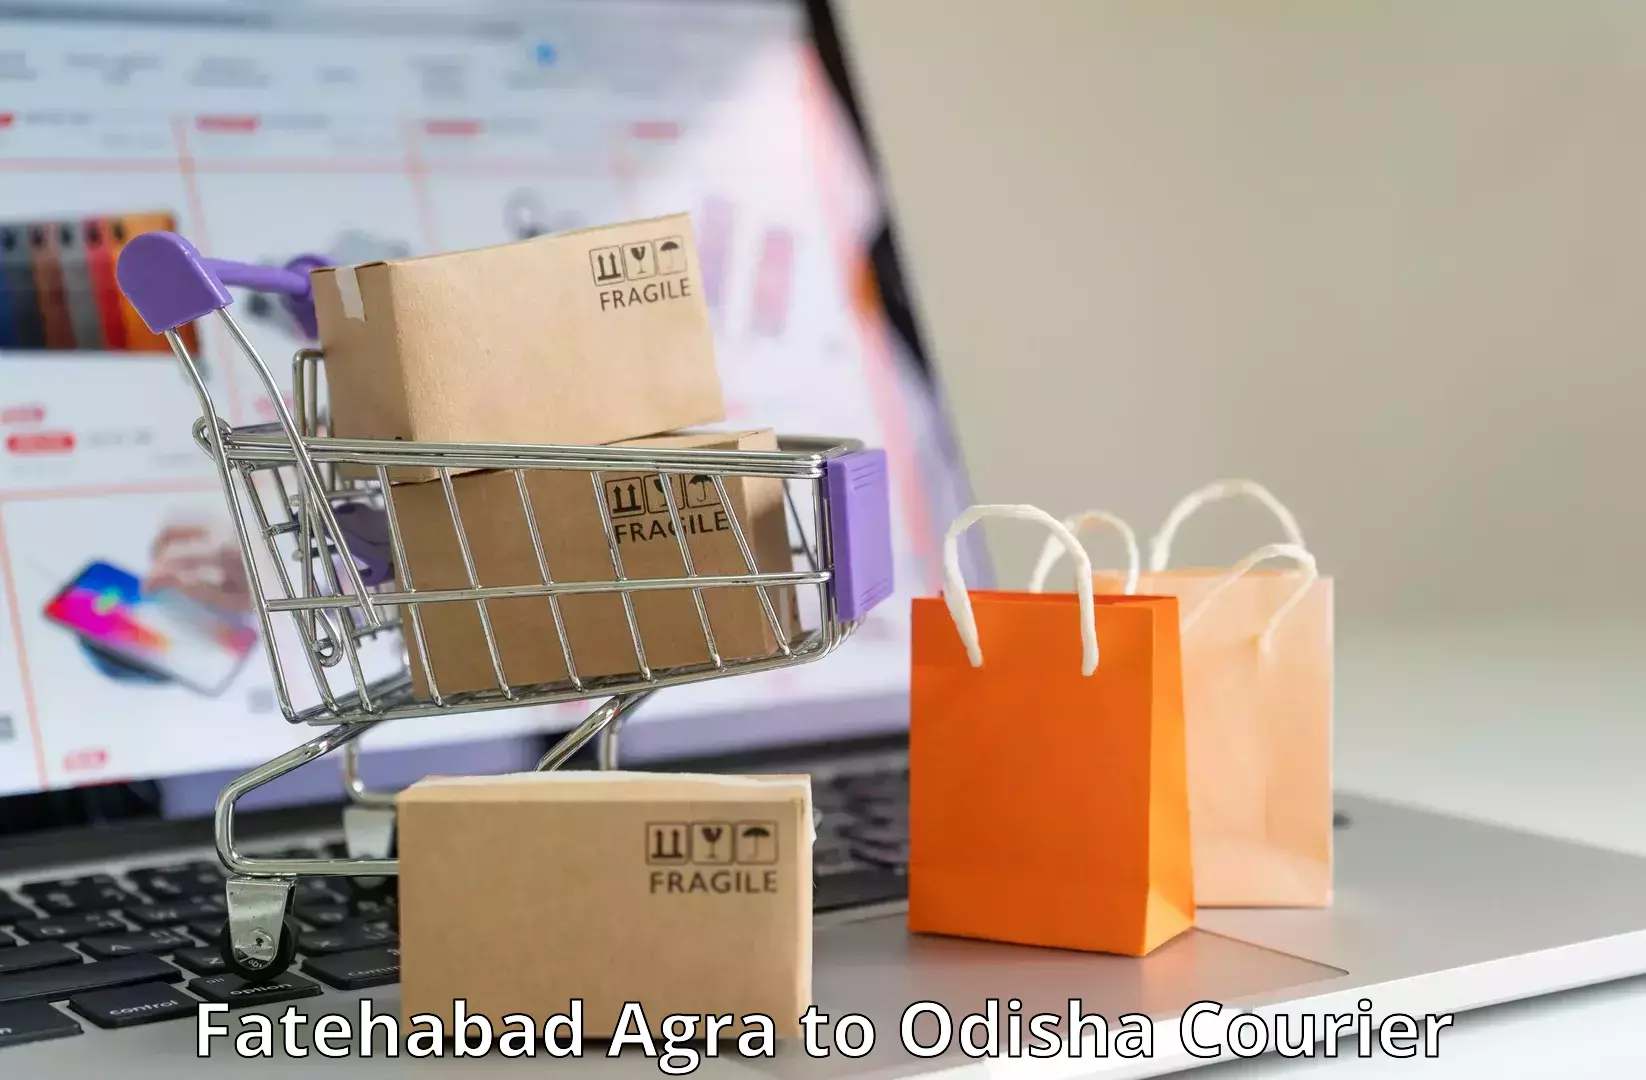 Next day courier Fatehabad Agra to Tihidi